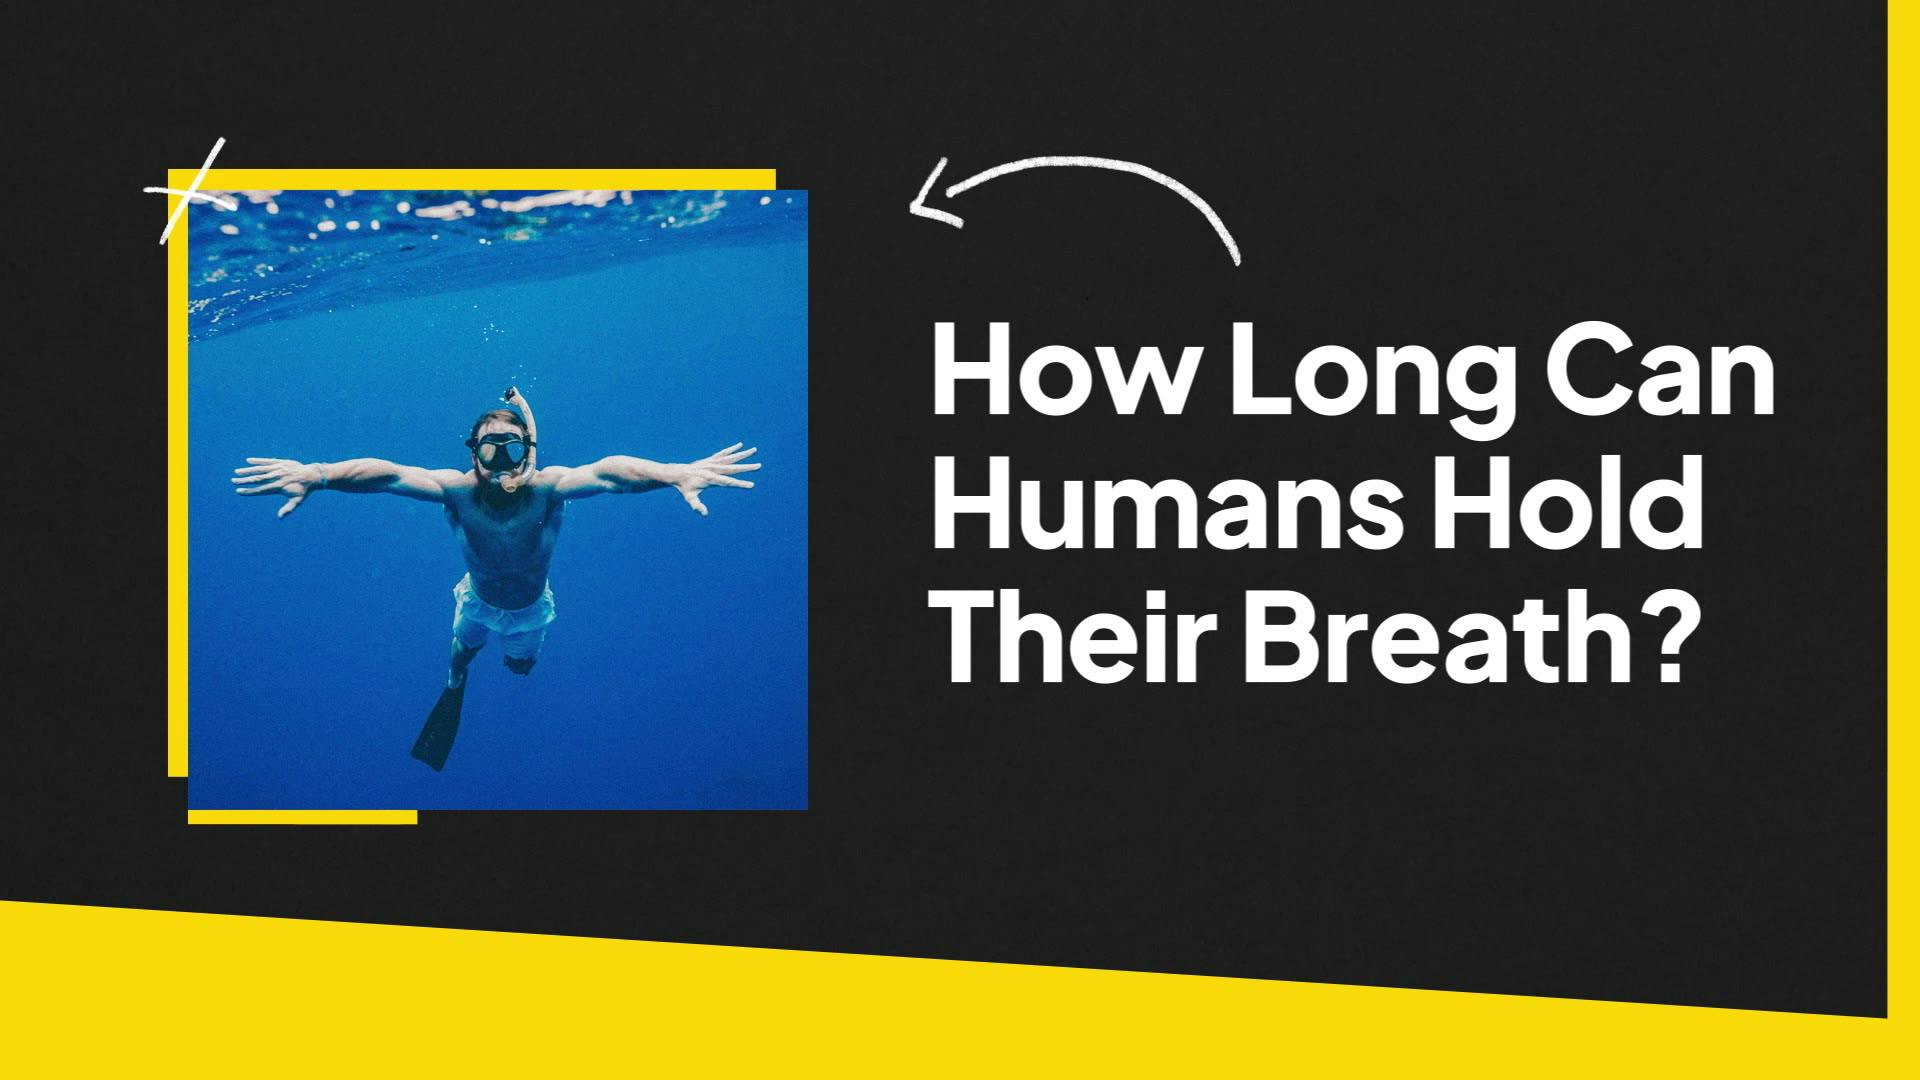 OOL-46 | How Long Can Humans Hold Their Breath?